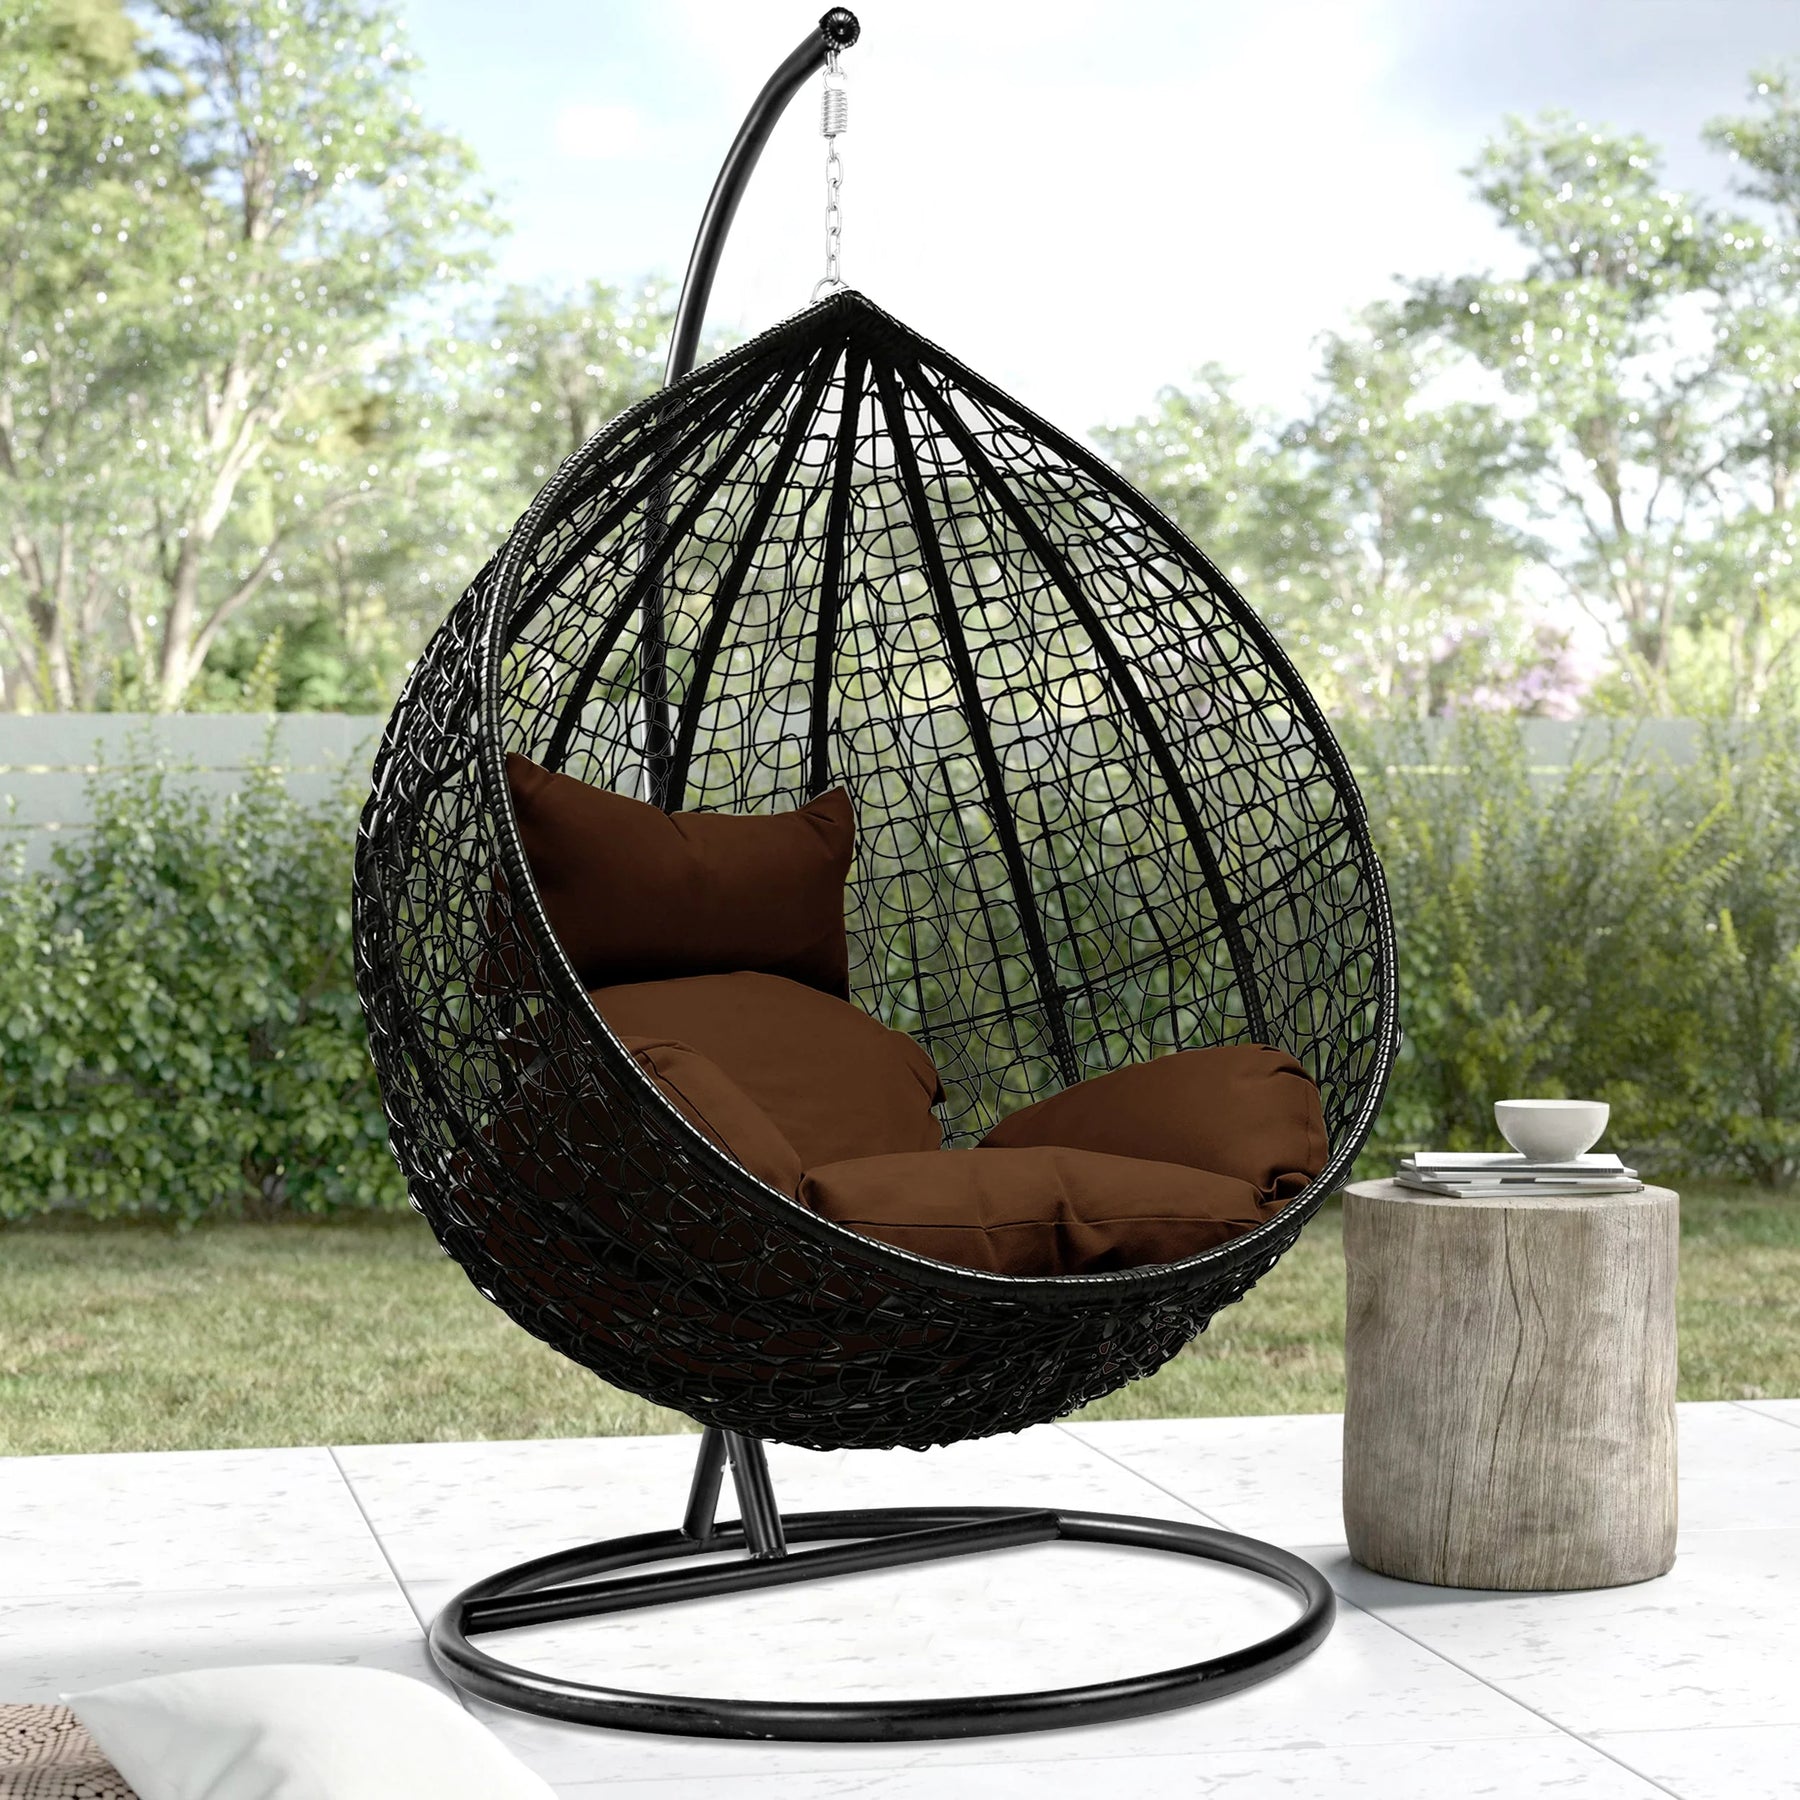 The Hanging Egg Chair with Stand: A Perfect Blend of Comfort and Style